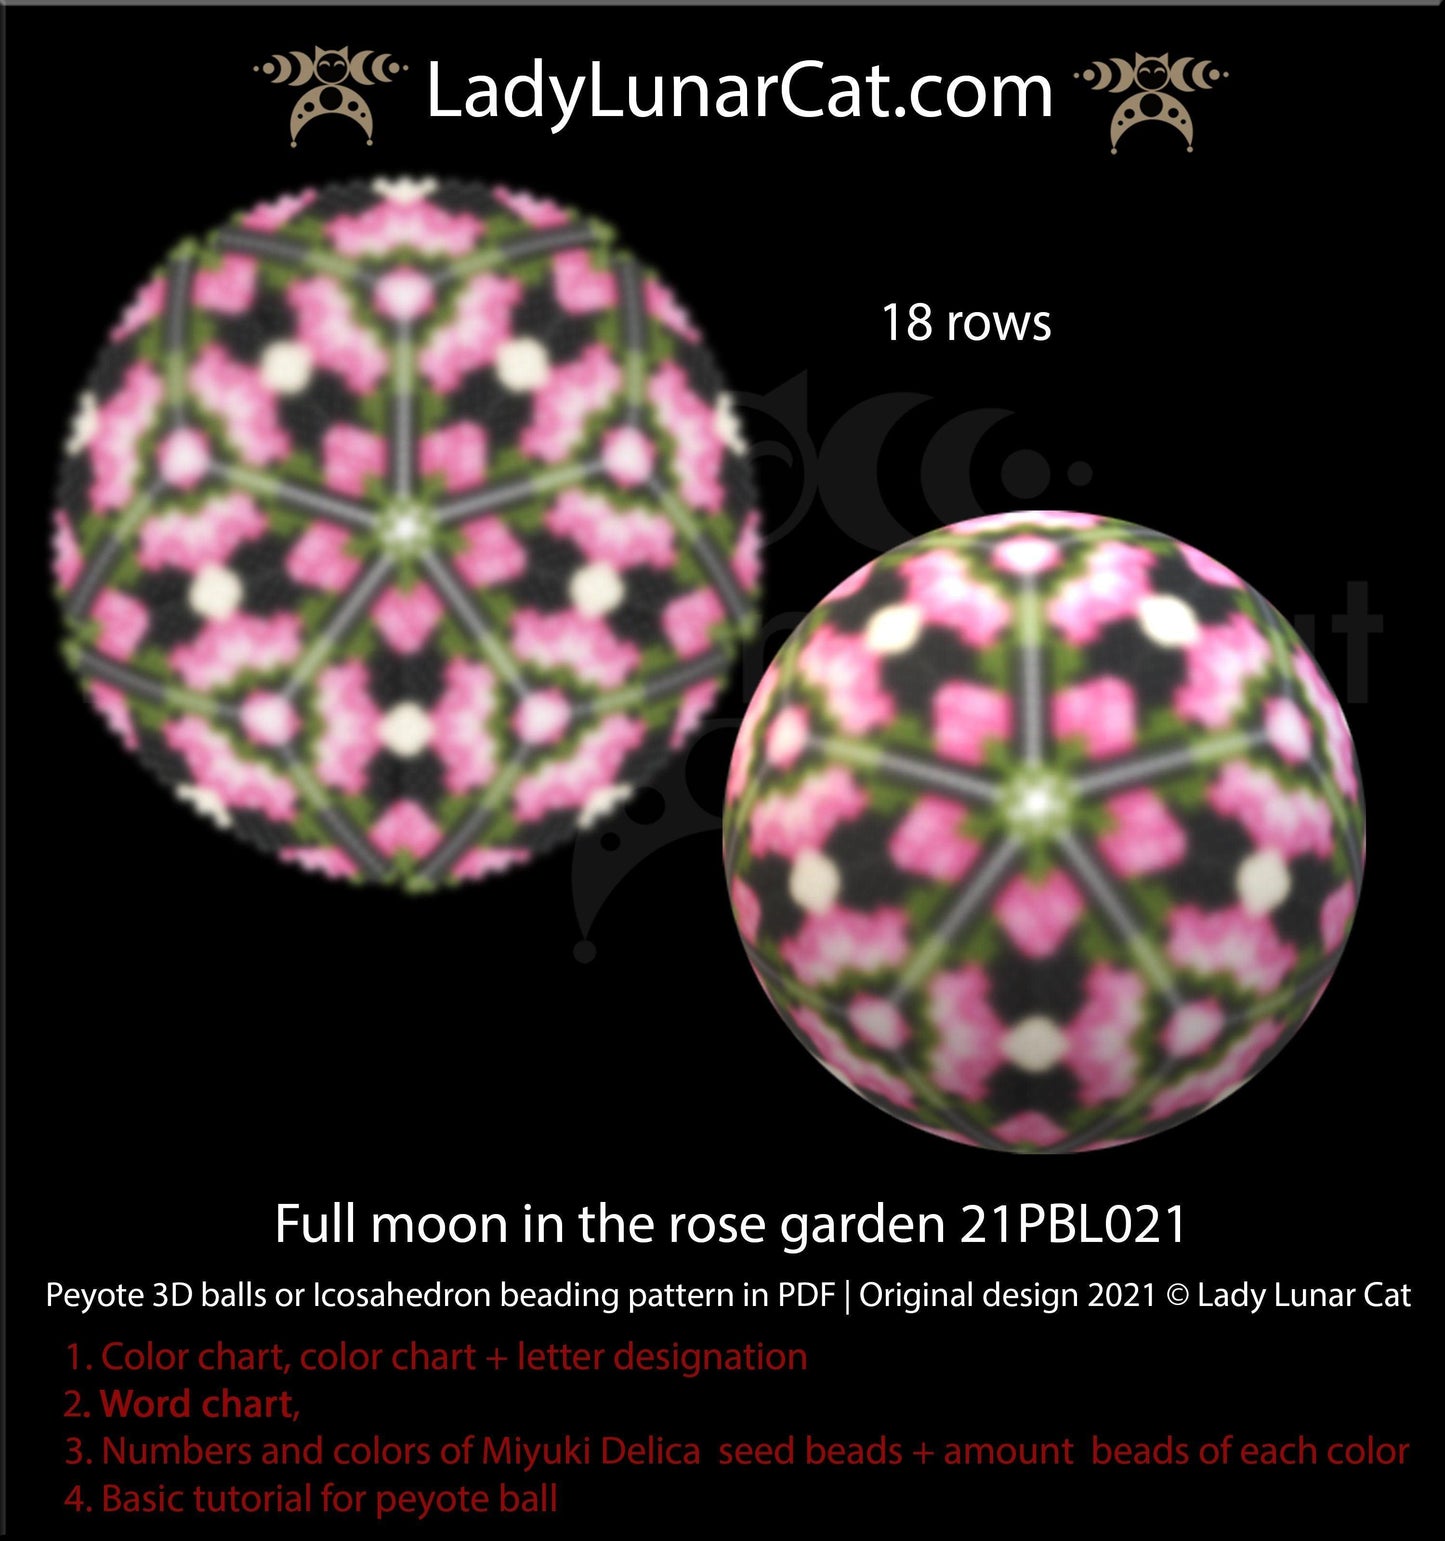 Copy of Beaded ball pattern for beading | Peyote 3d Icosahedron Wild Rose 21PBL019 16 rows LadyLunarCat